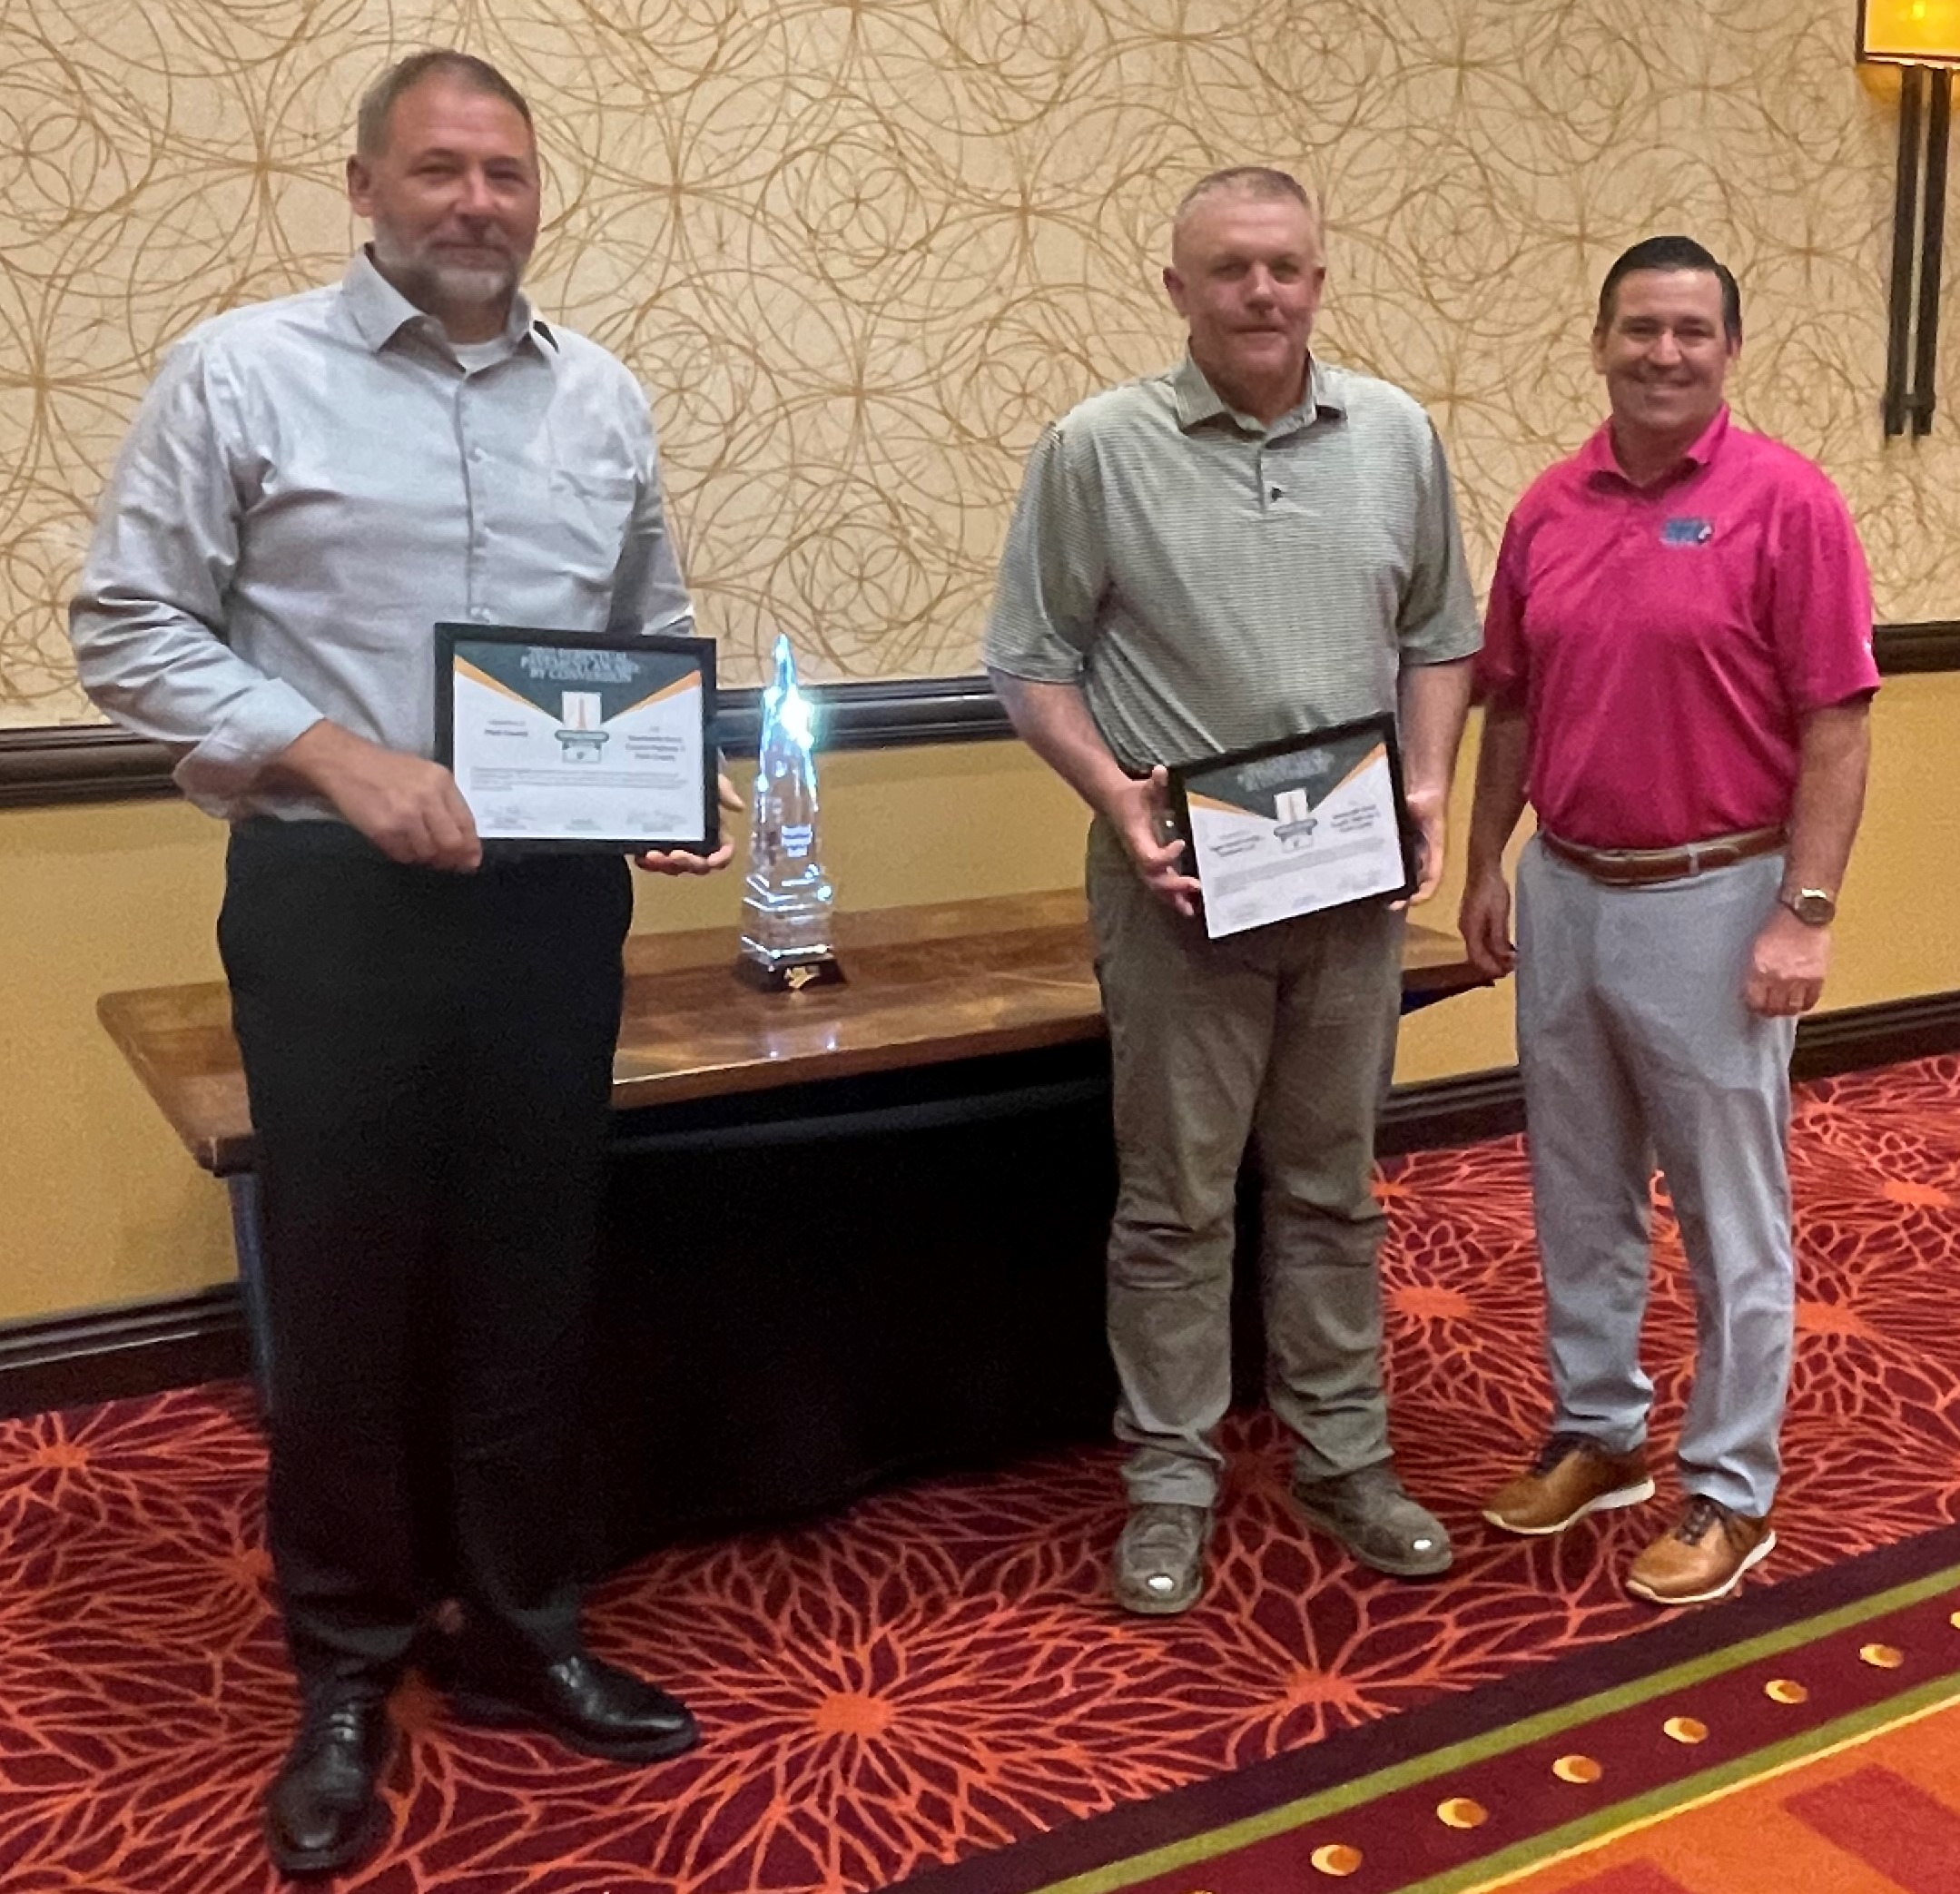 On May 12, 2022, Illinois Asphalt Pavement Association presented representatives from Piatt County and Open Road Paving, LLC, with their well-deserved PPA: By Conversion for their Montecello Rd. (County Hwy. 4) in Piatt County project. This is only the second U.S. municipal road since the PPA program began in 2001 to be recognized. 